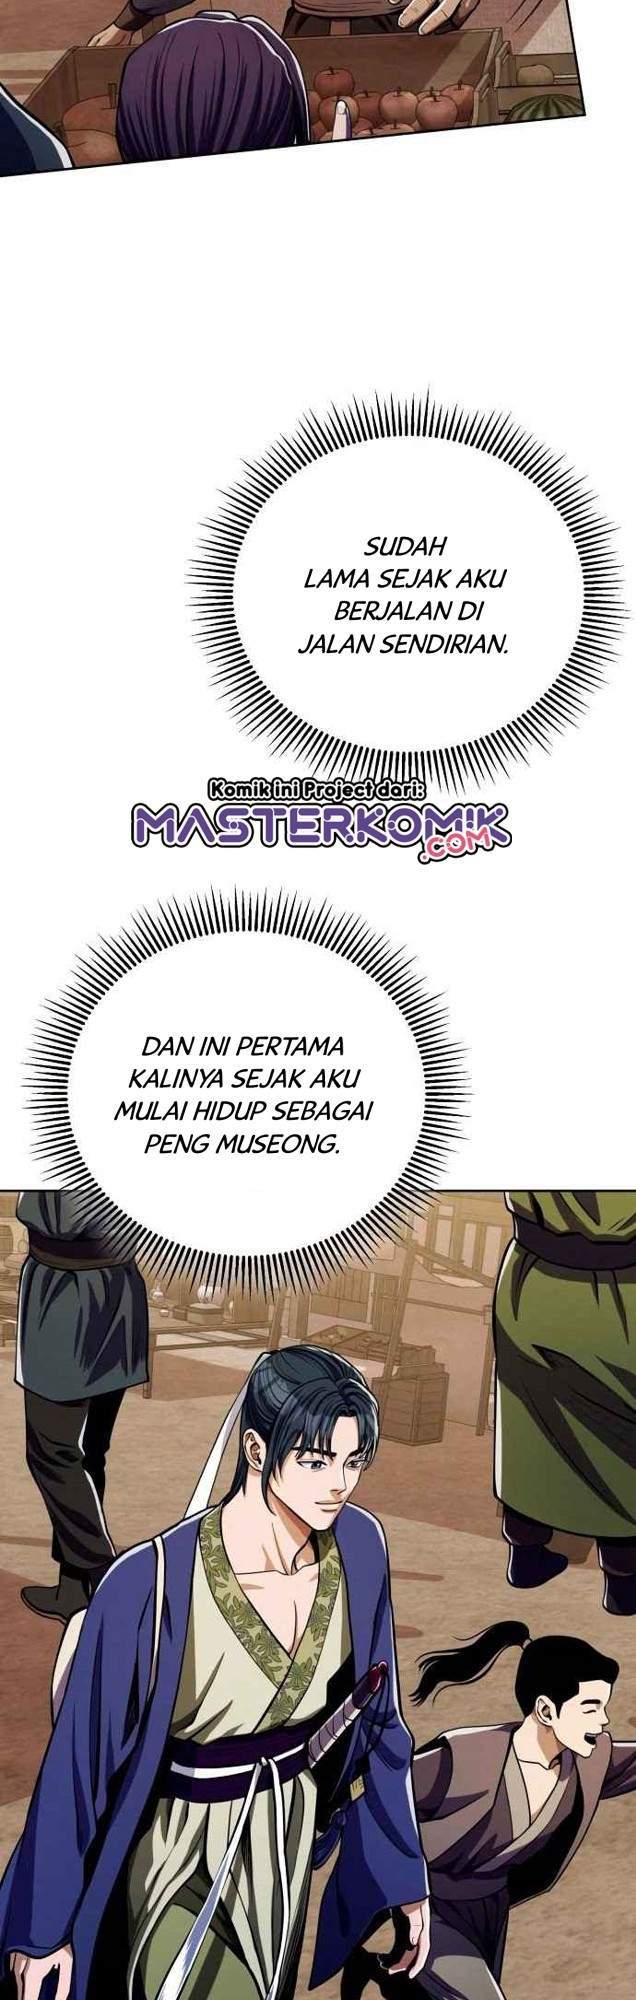 Ha Buk Paeng’s Youngest Son Chapter 8 58